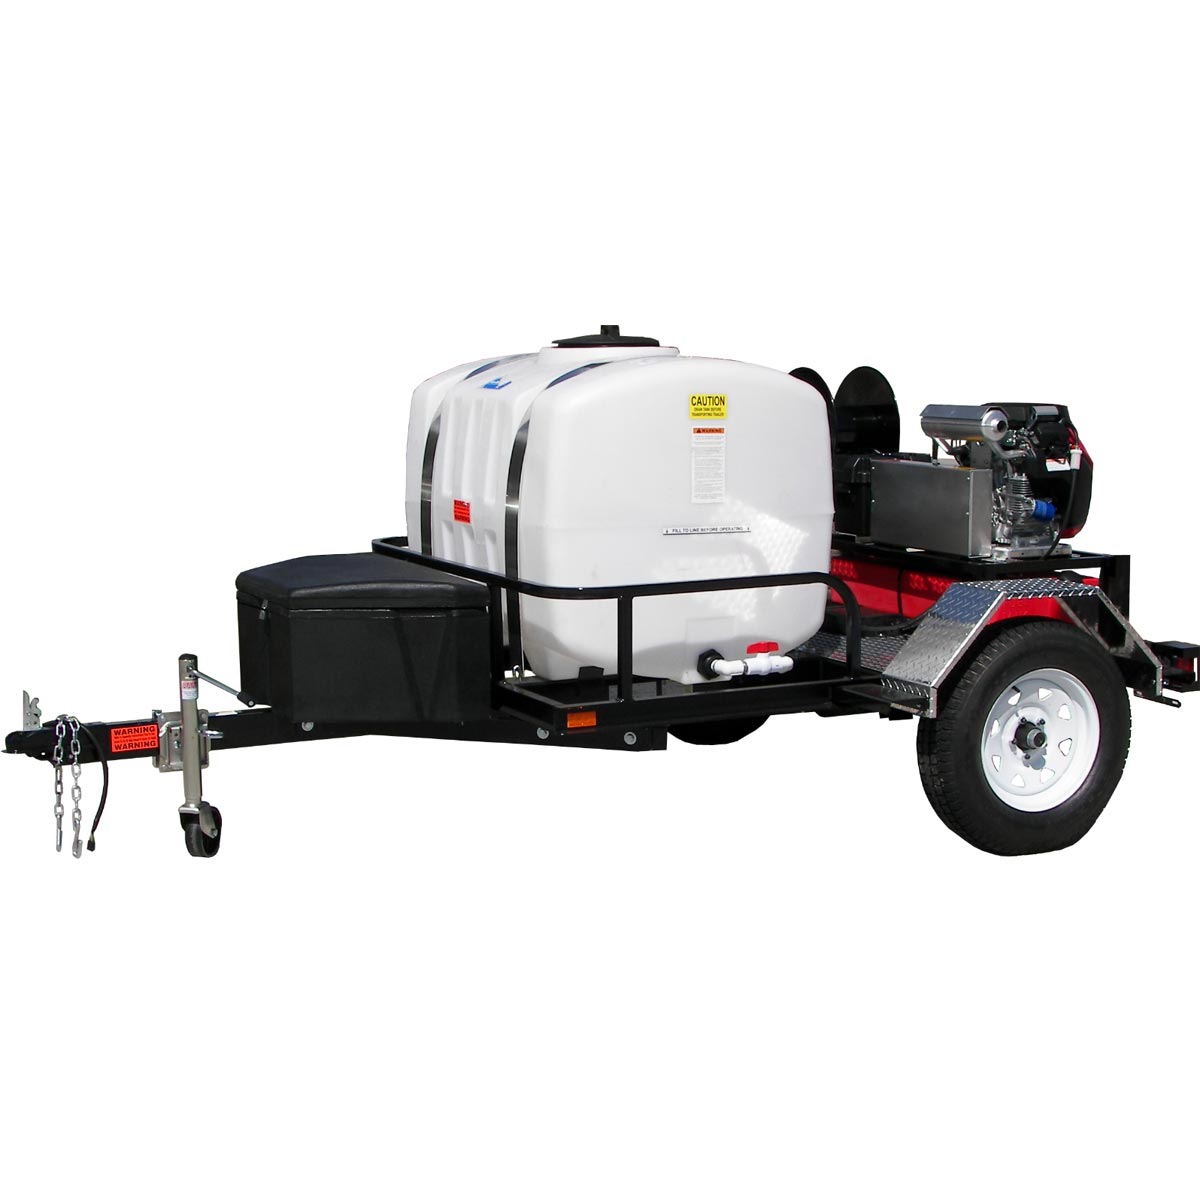 TRHDCV8030HG Pressure Pro GP Pressure Washer Tow-Pro Trailer Outfit 3000 PSI  8.0 GPM Freight Included